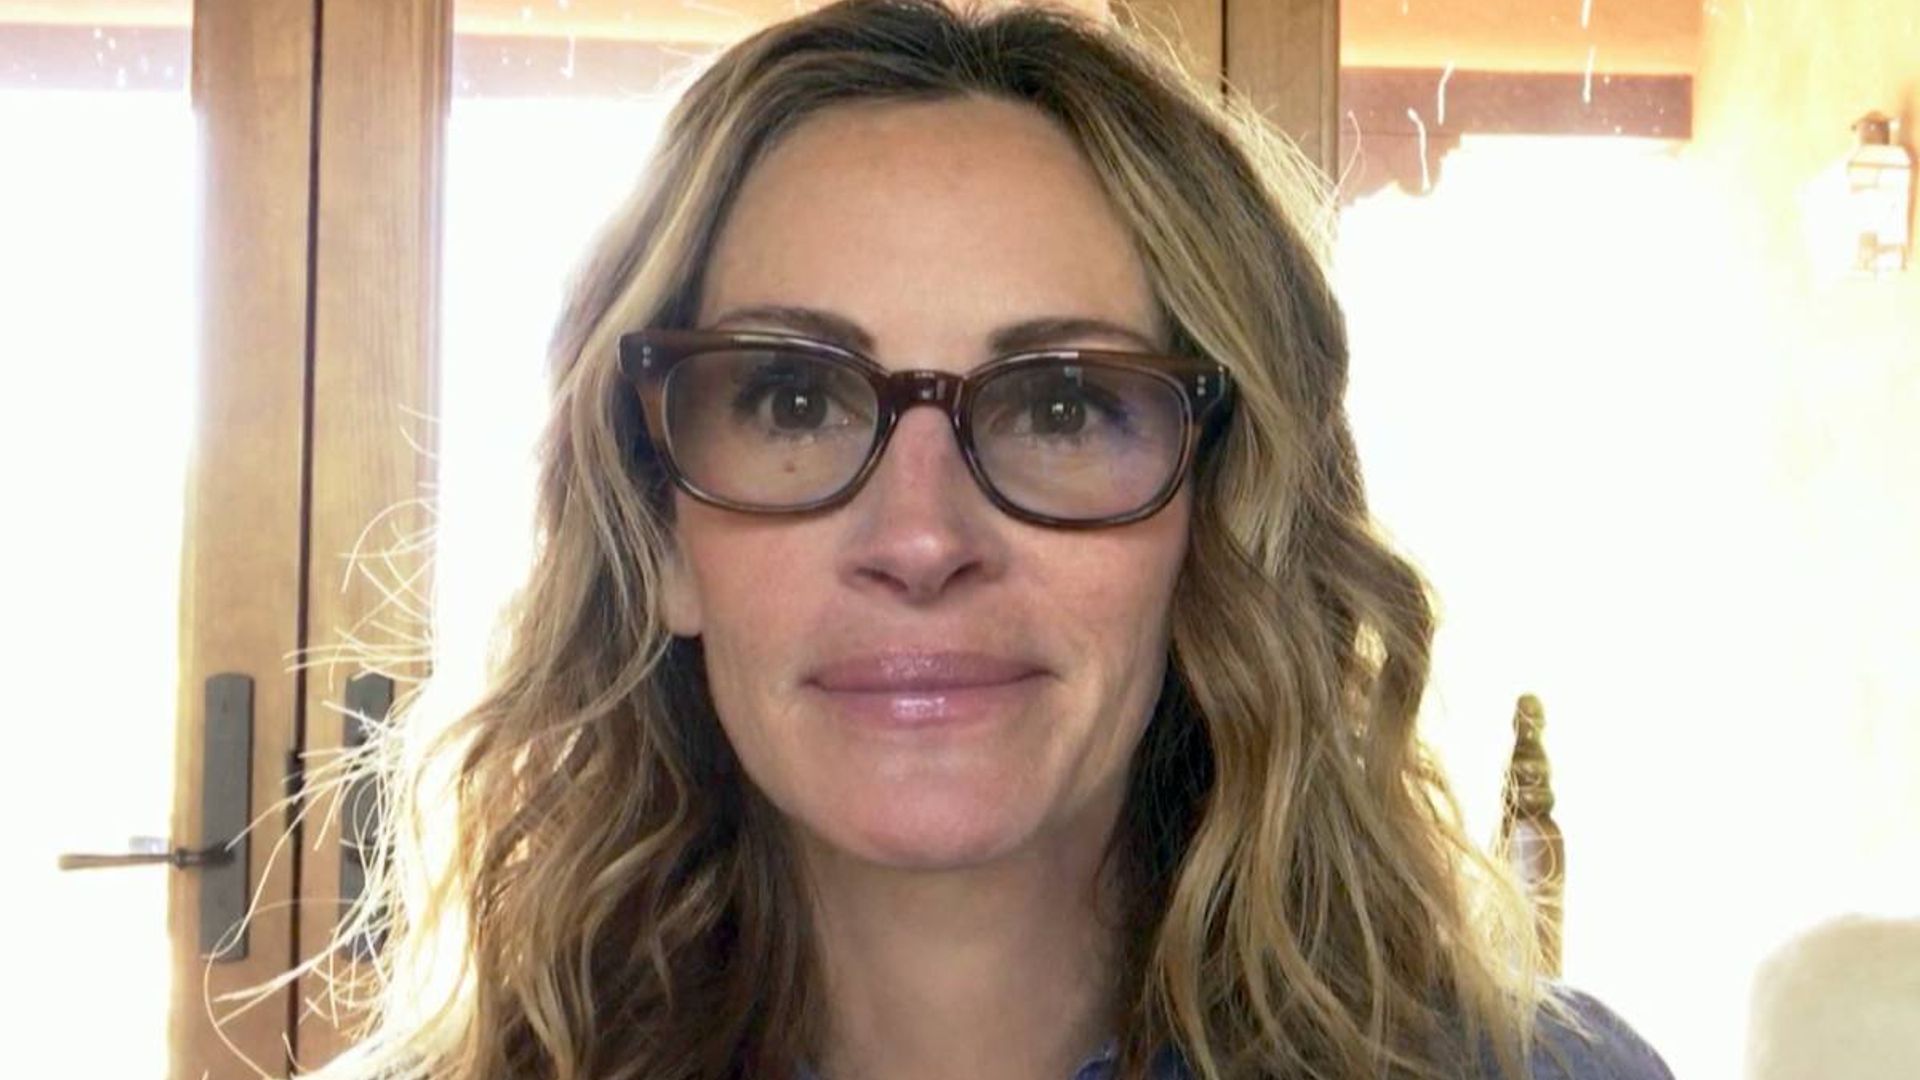 Julia Roberts looks unimpressed in latest photo as she channels alter-ego